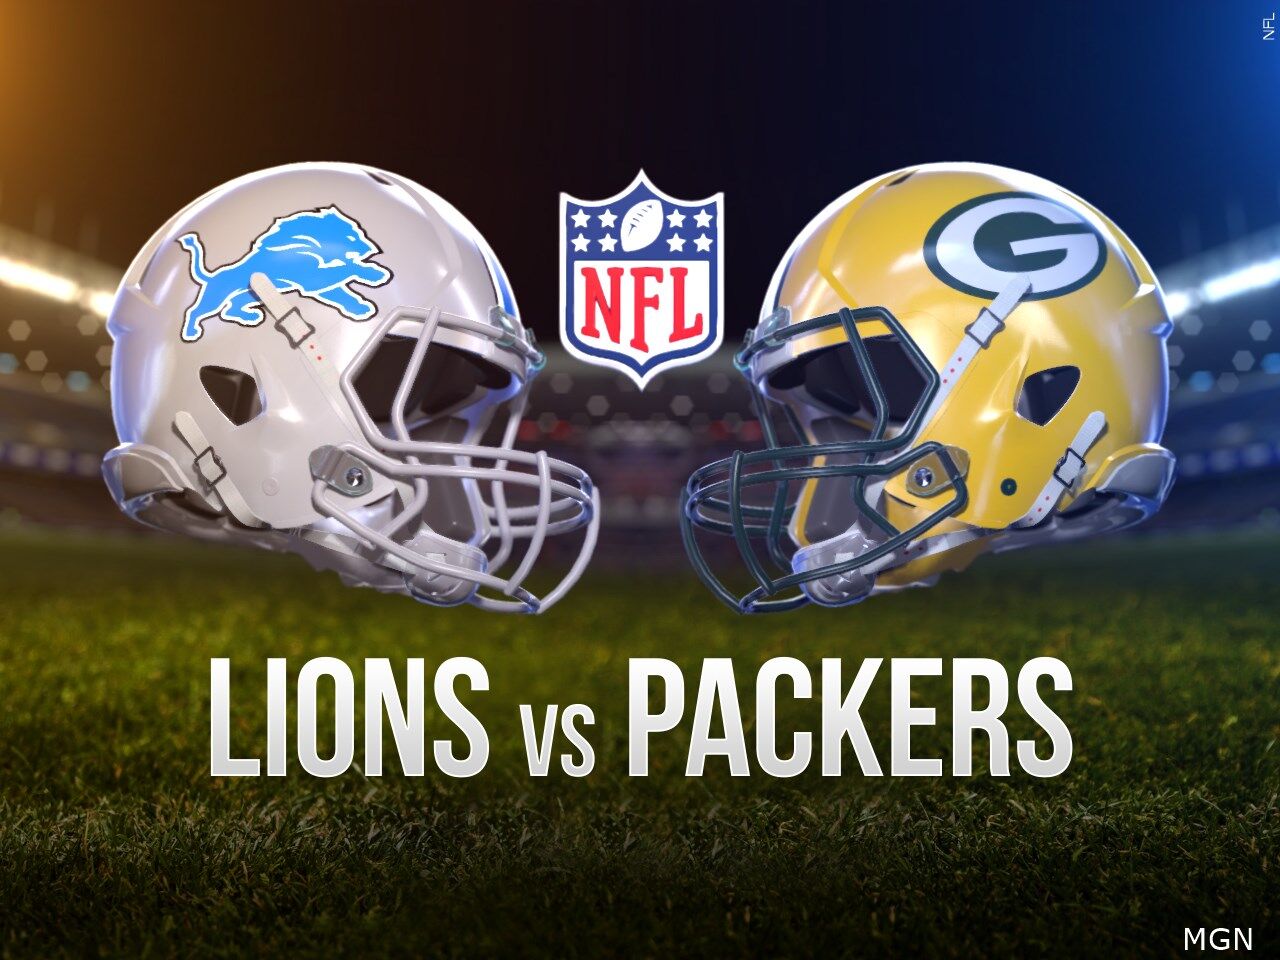 How to watch the Lions vs. Packers game on Thursday night